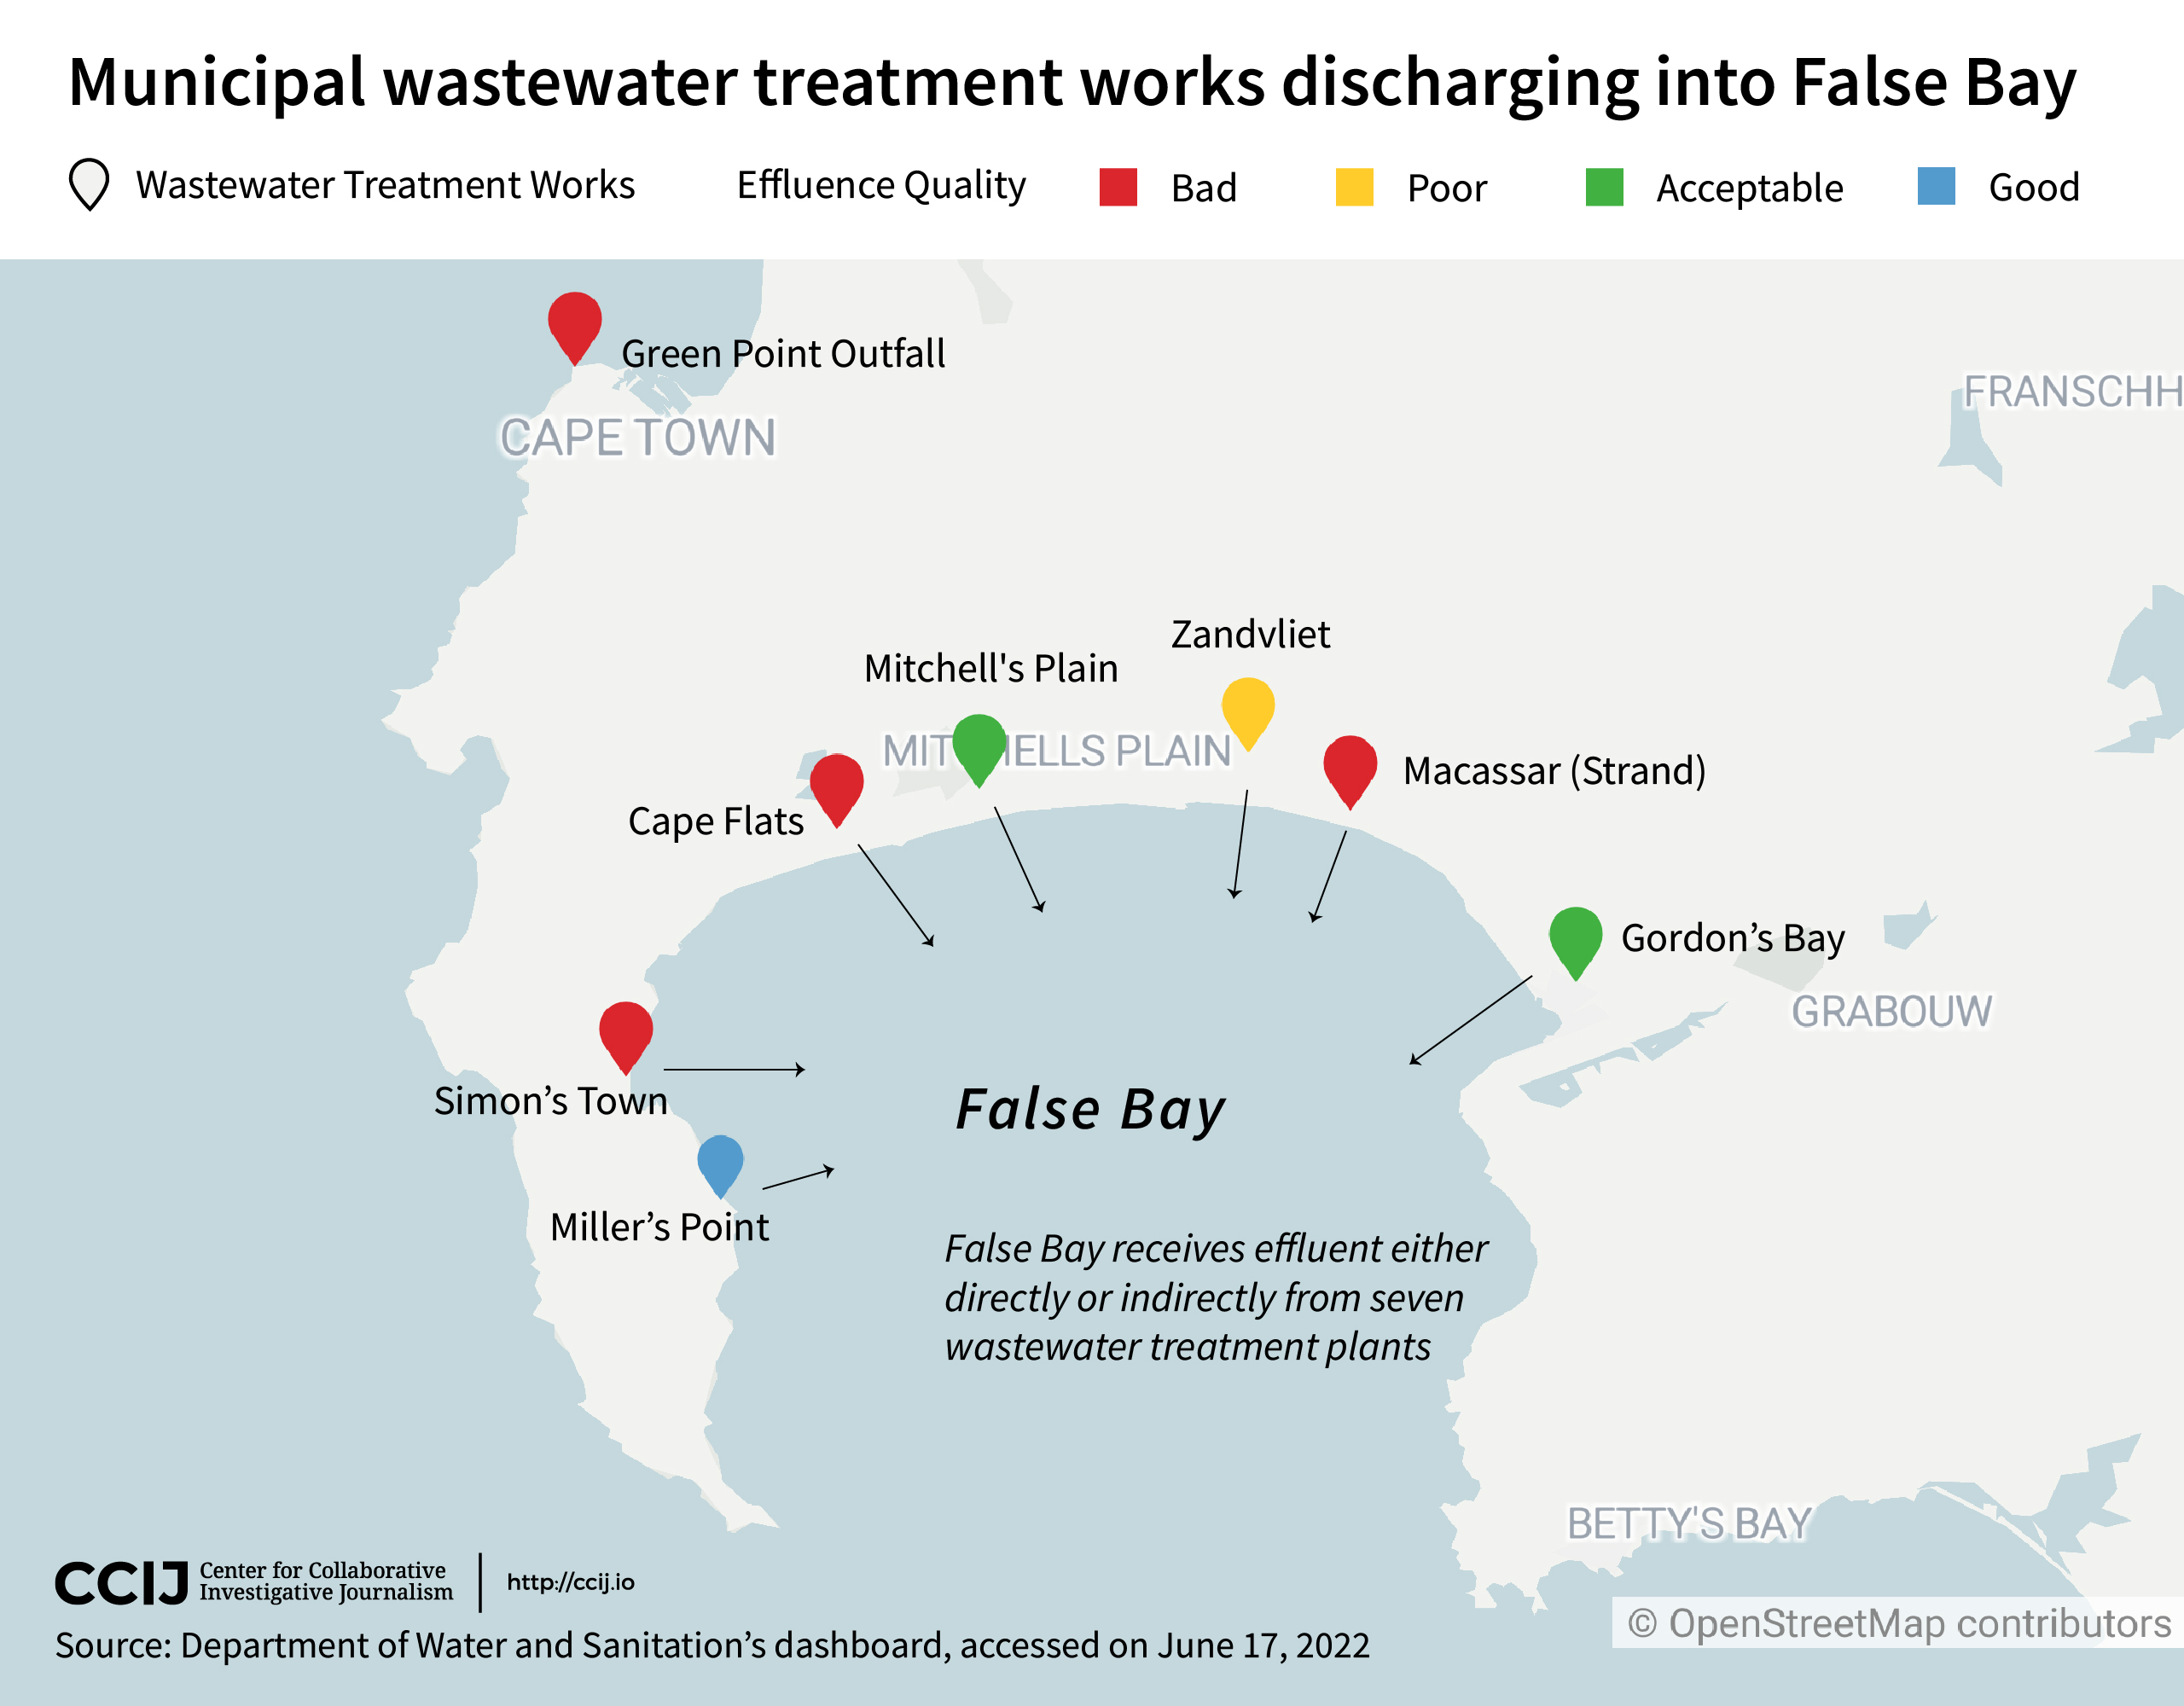 A map illustrating municipal wastewater treatment works discharging into False Bay.